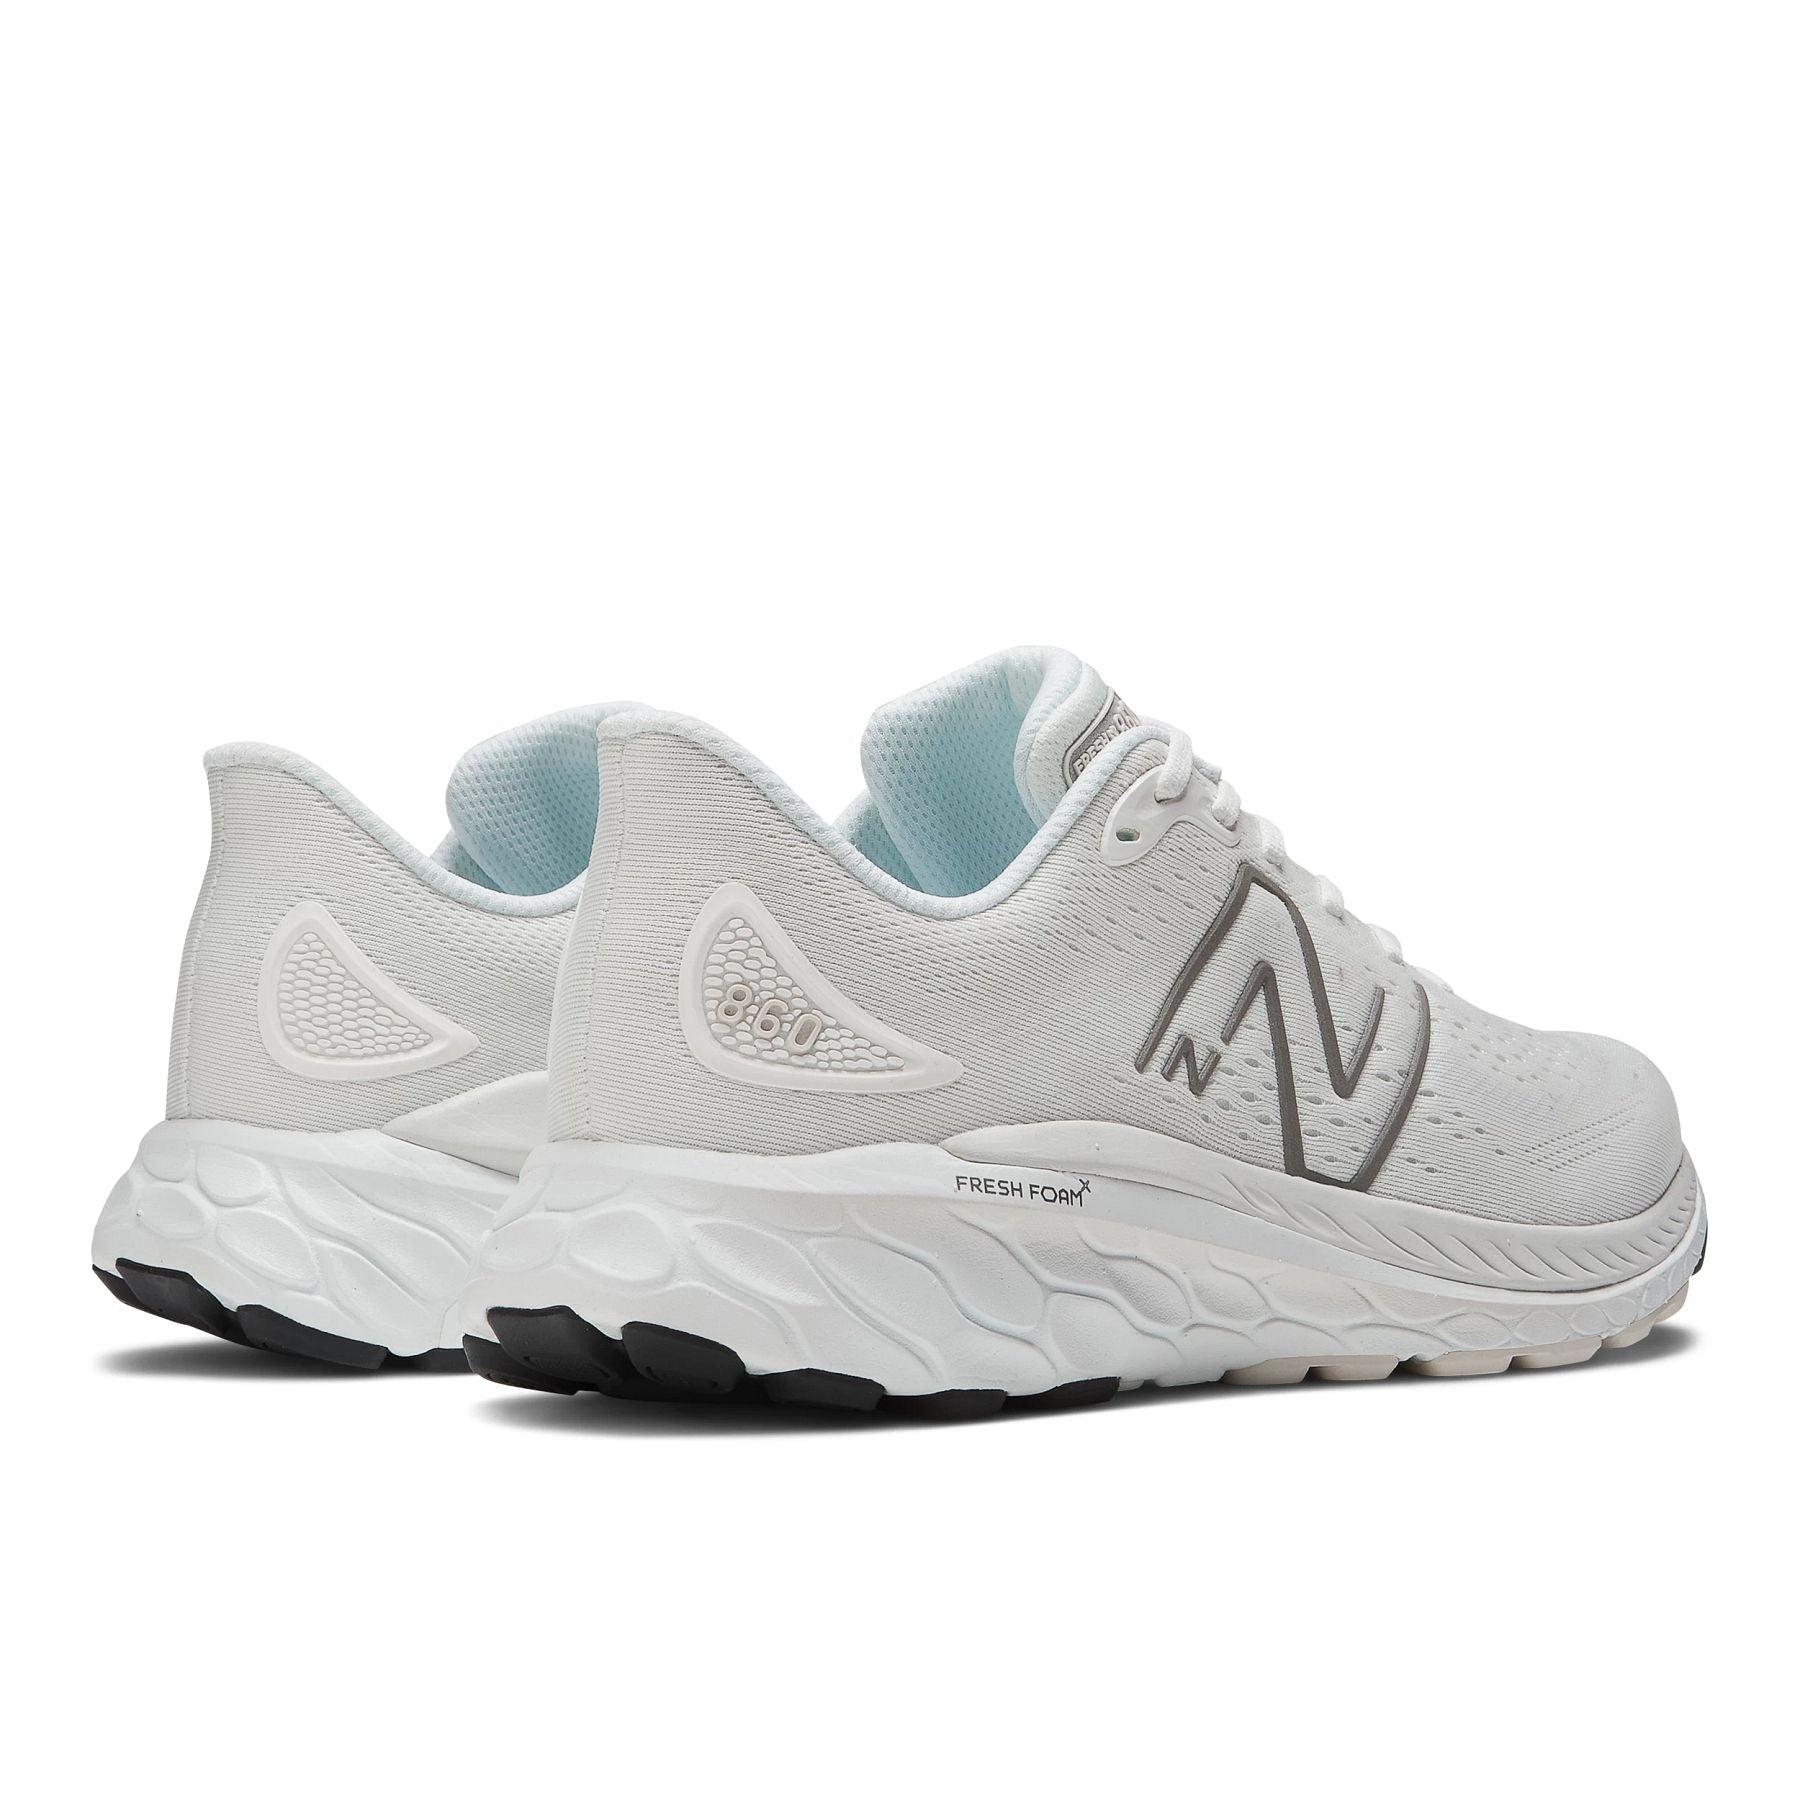 Back angle view of the Men's 860 V13 by New Balance in the color White/Silver